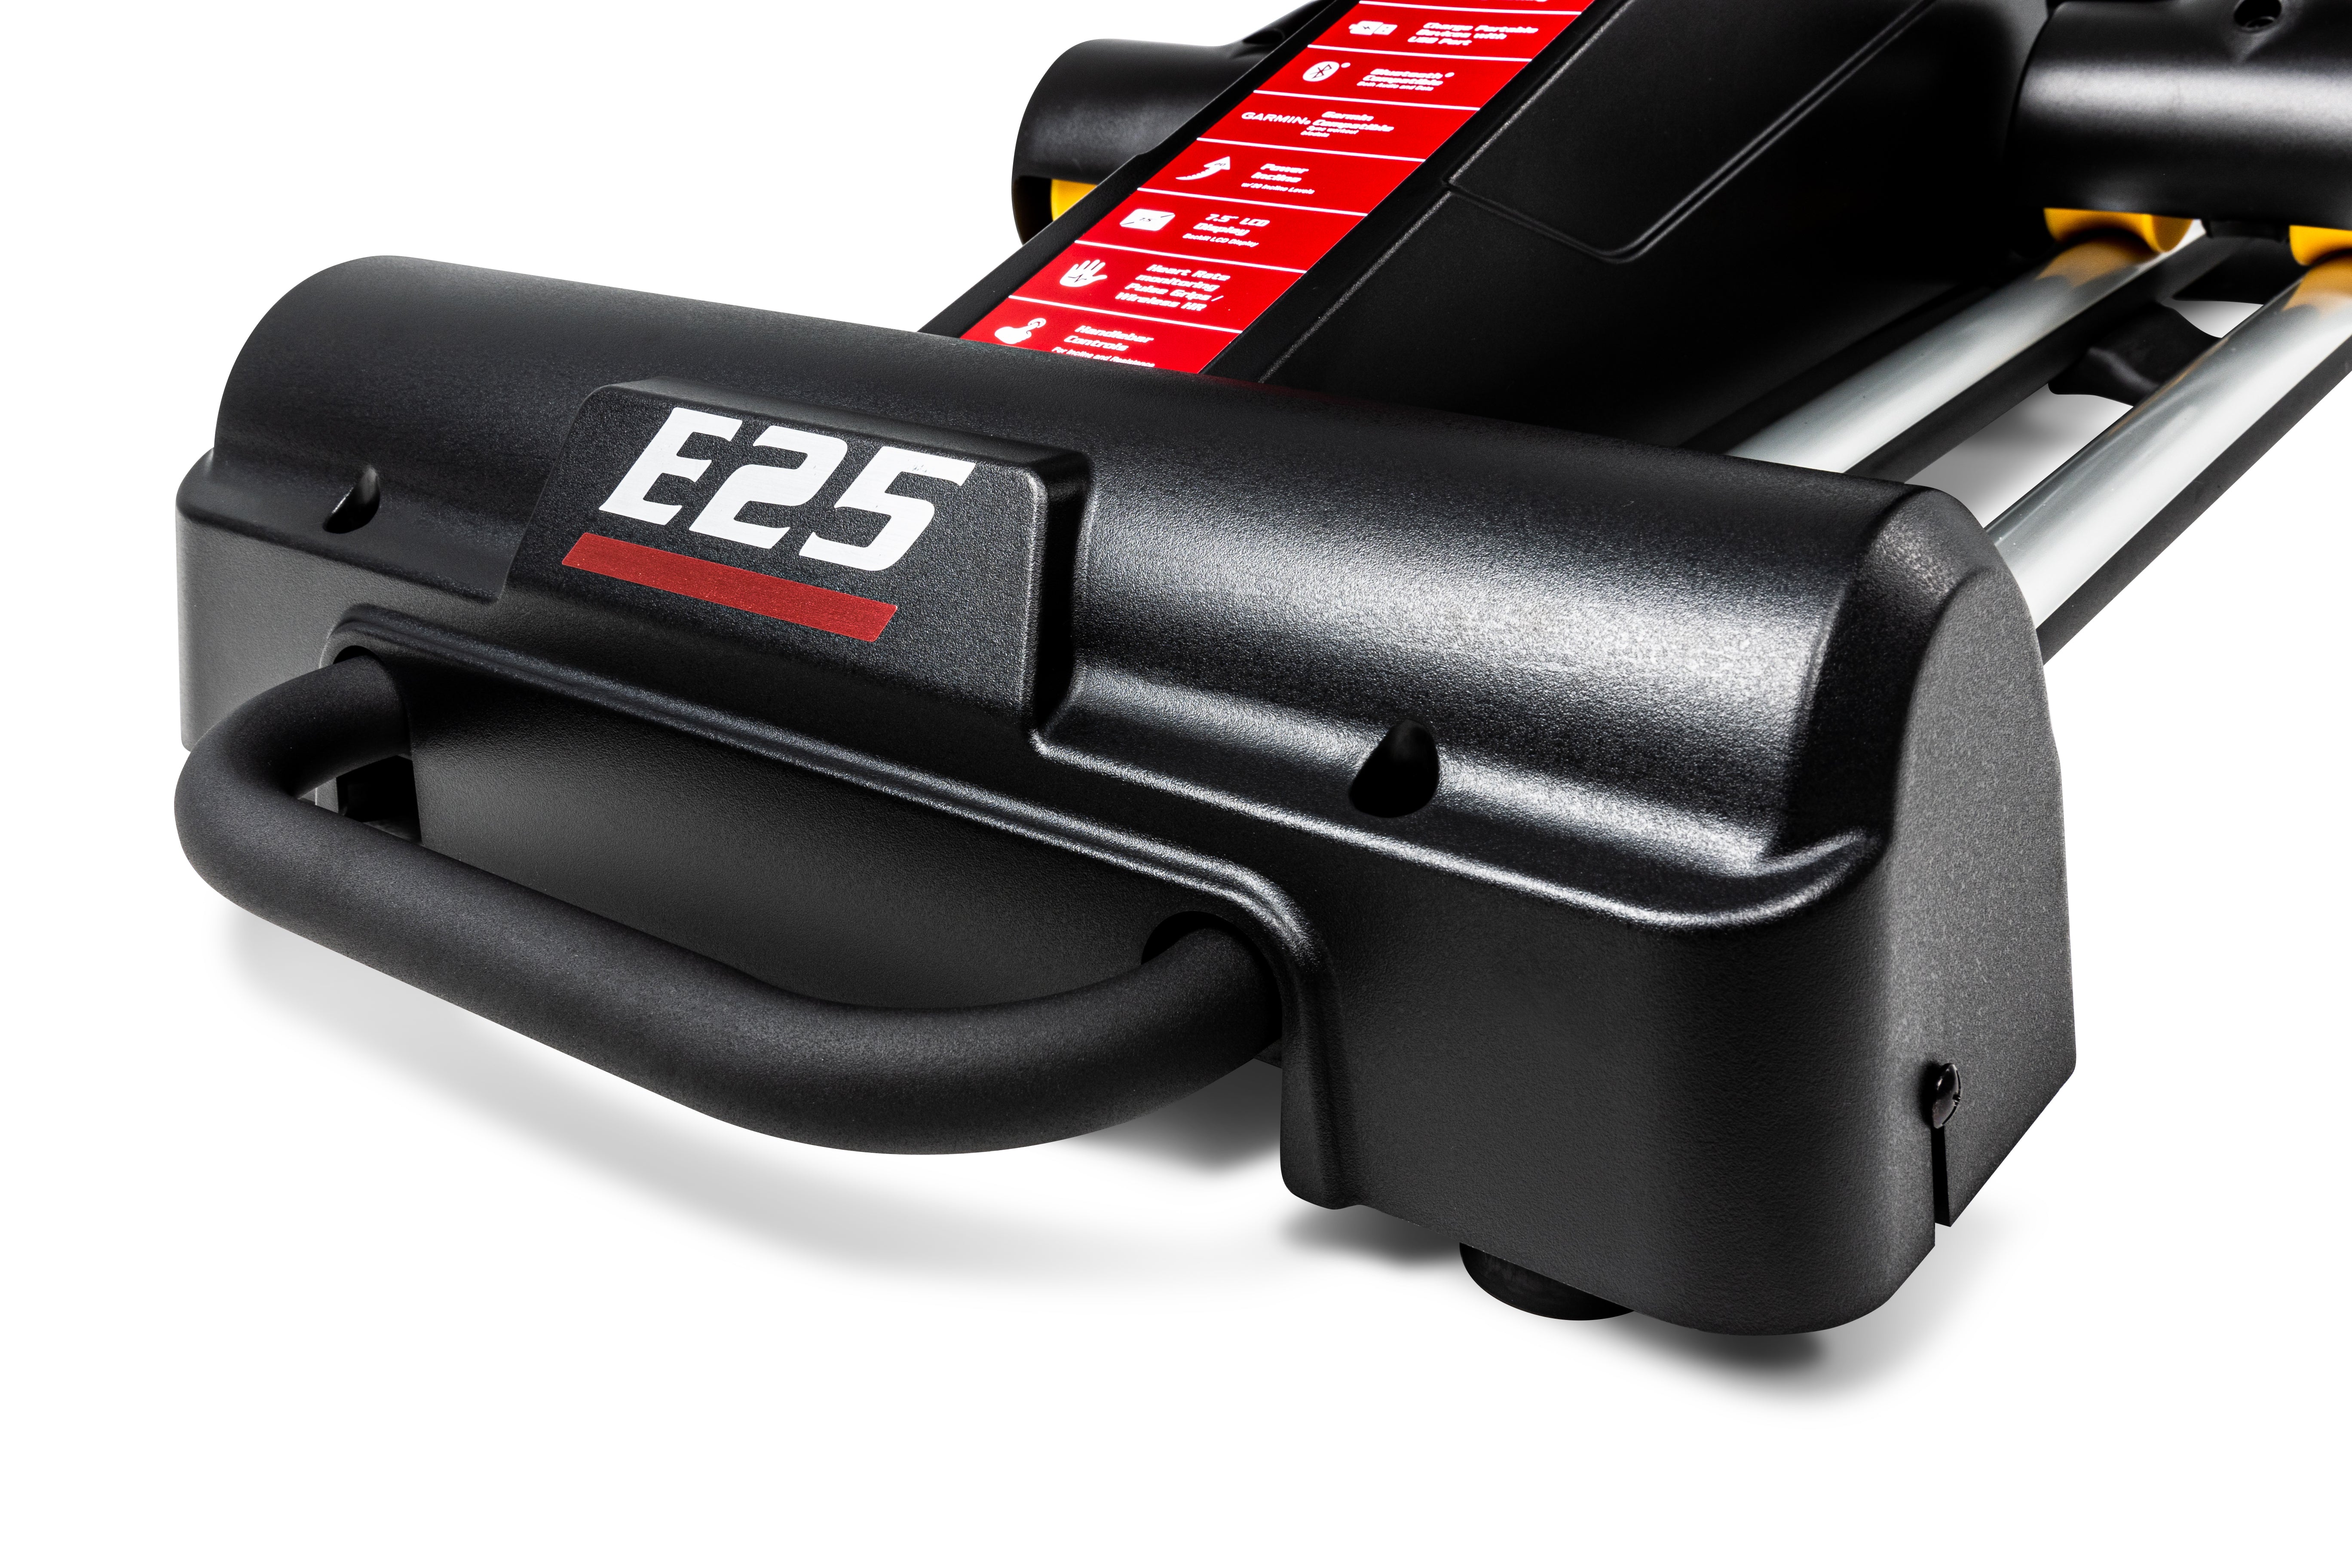 Detailed view of the Sole E25 elliptical machine's handlebar and side panel, emphasizing the 'E25' logo, black matte finish, and a portion of the control panel with red labeled buttons.